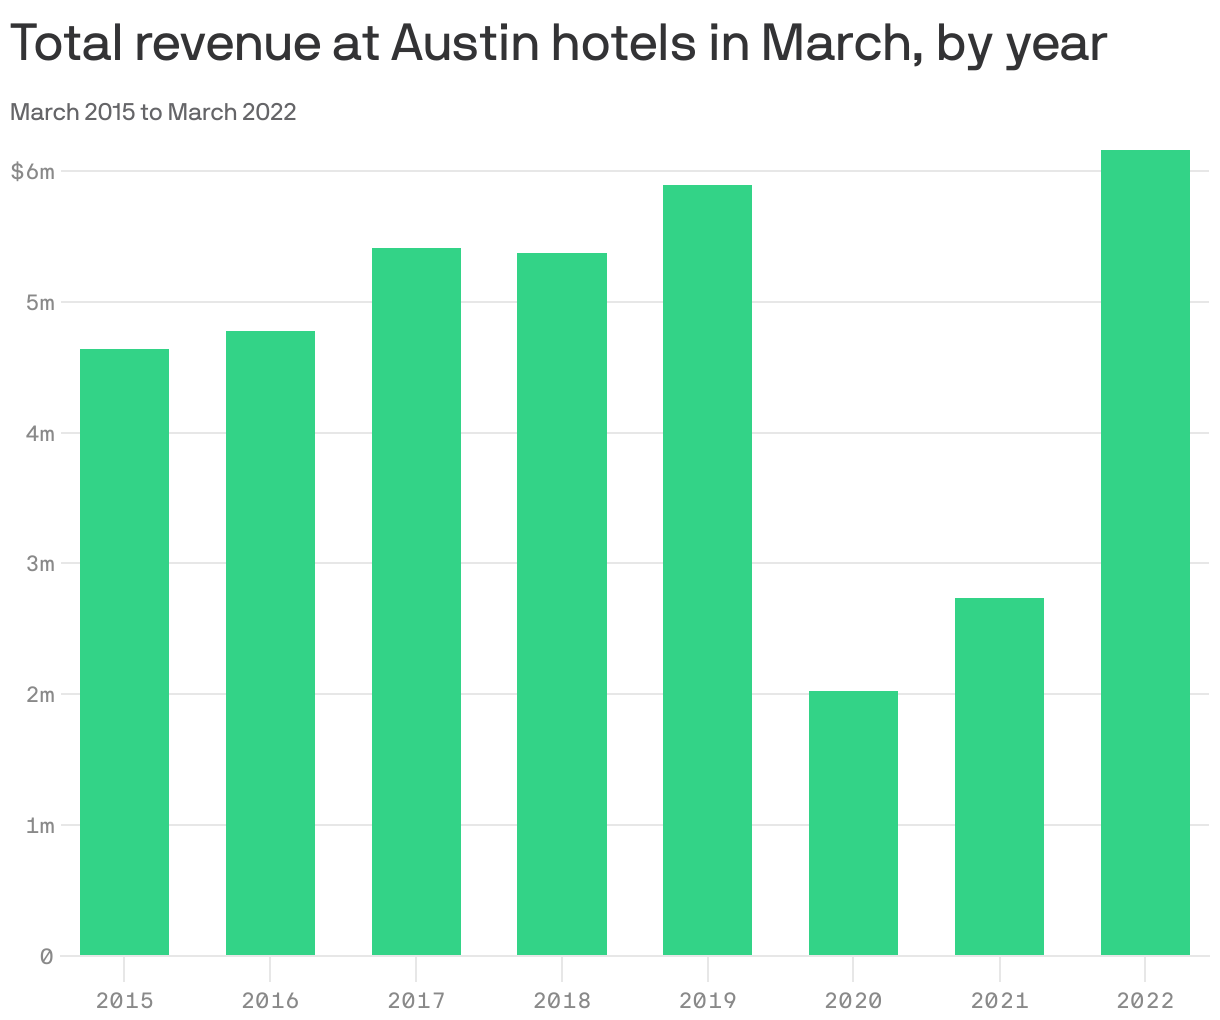 Total revenue at Austin hotels in March, by year